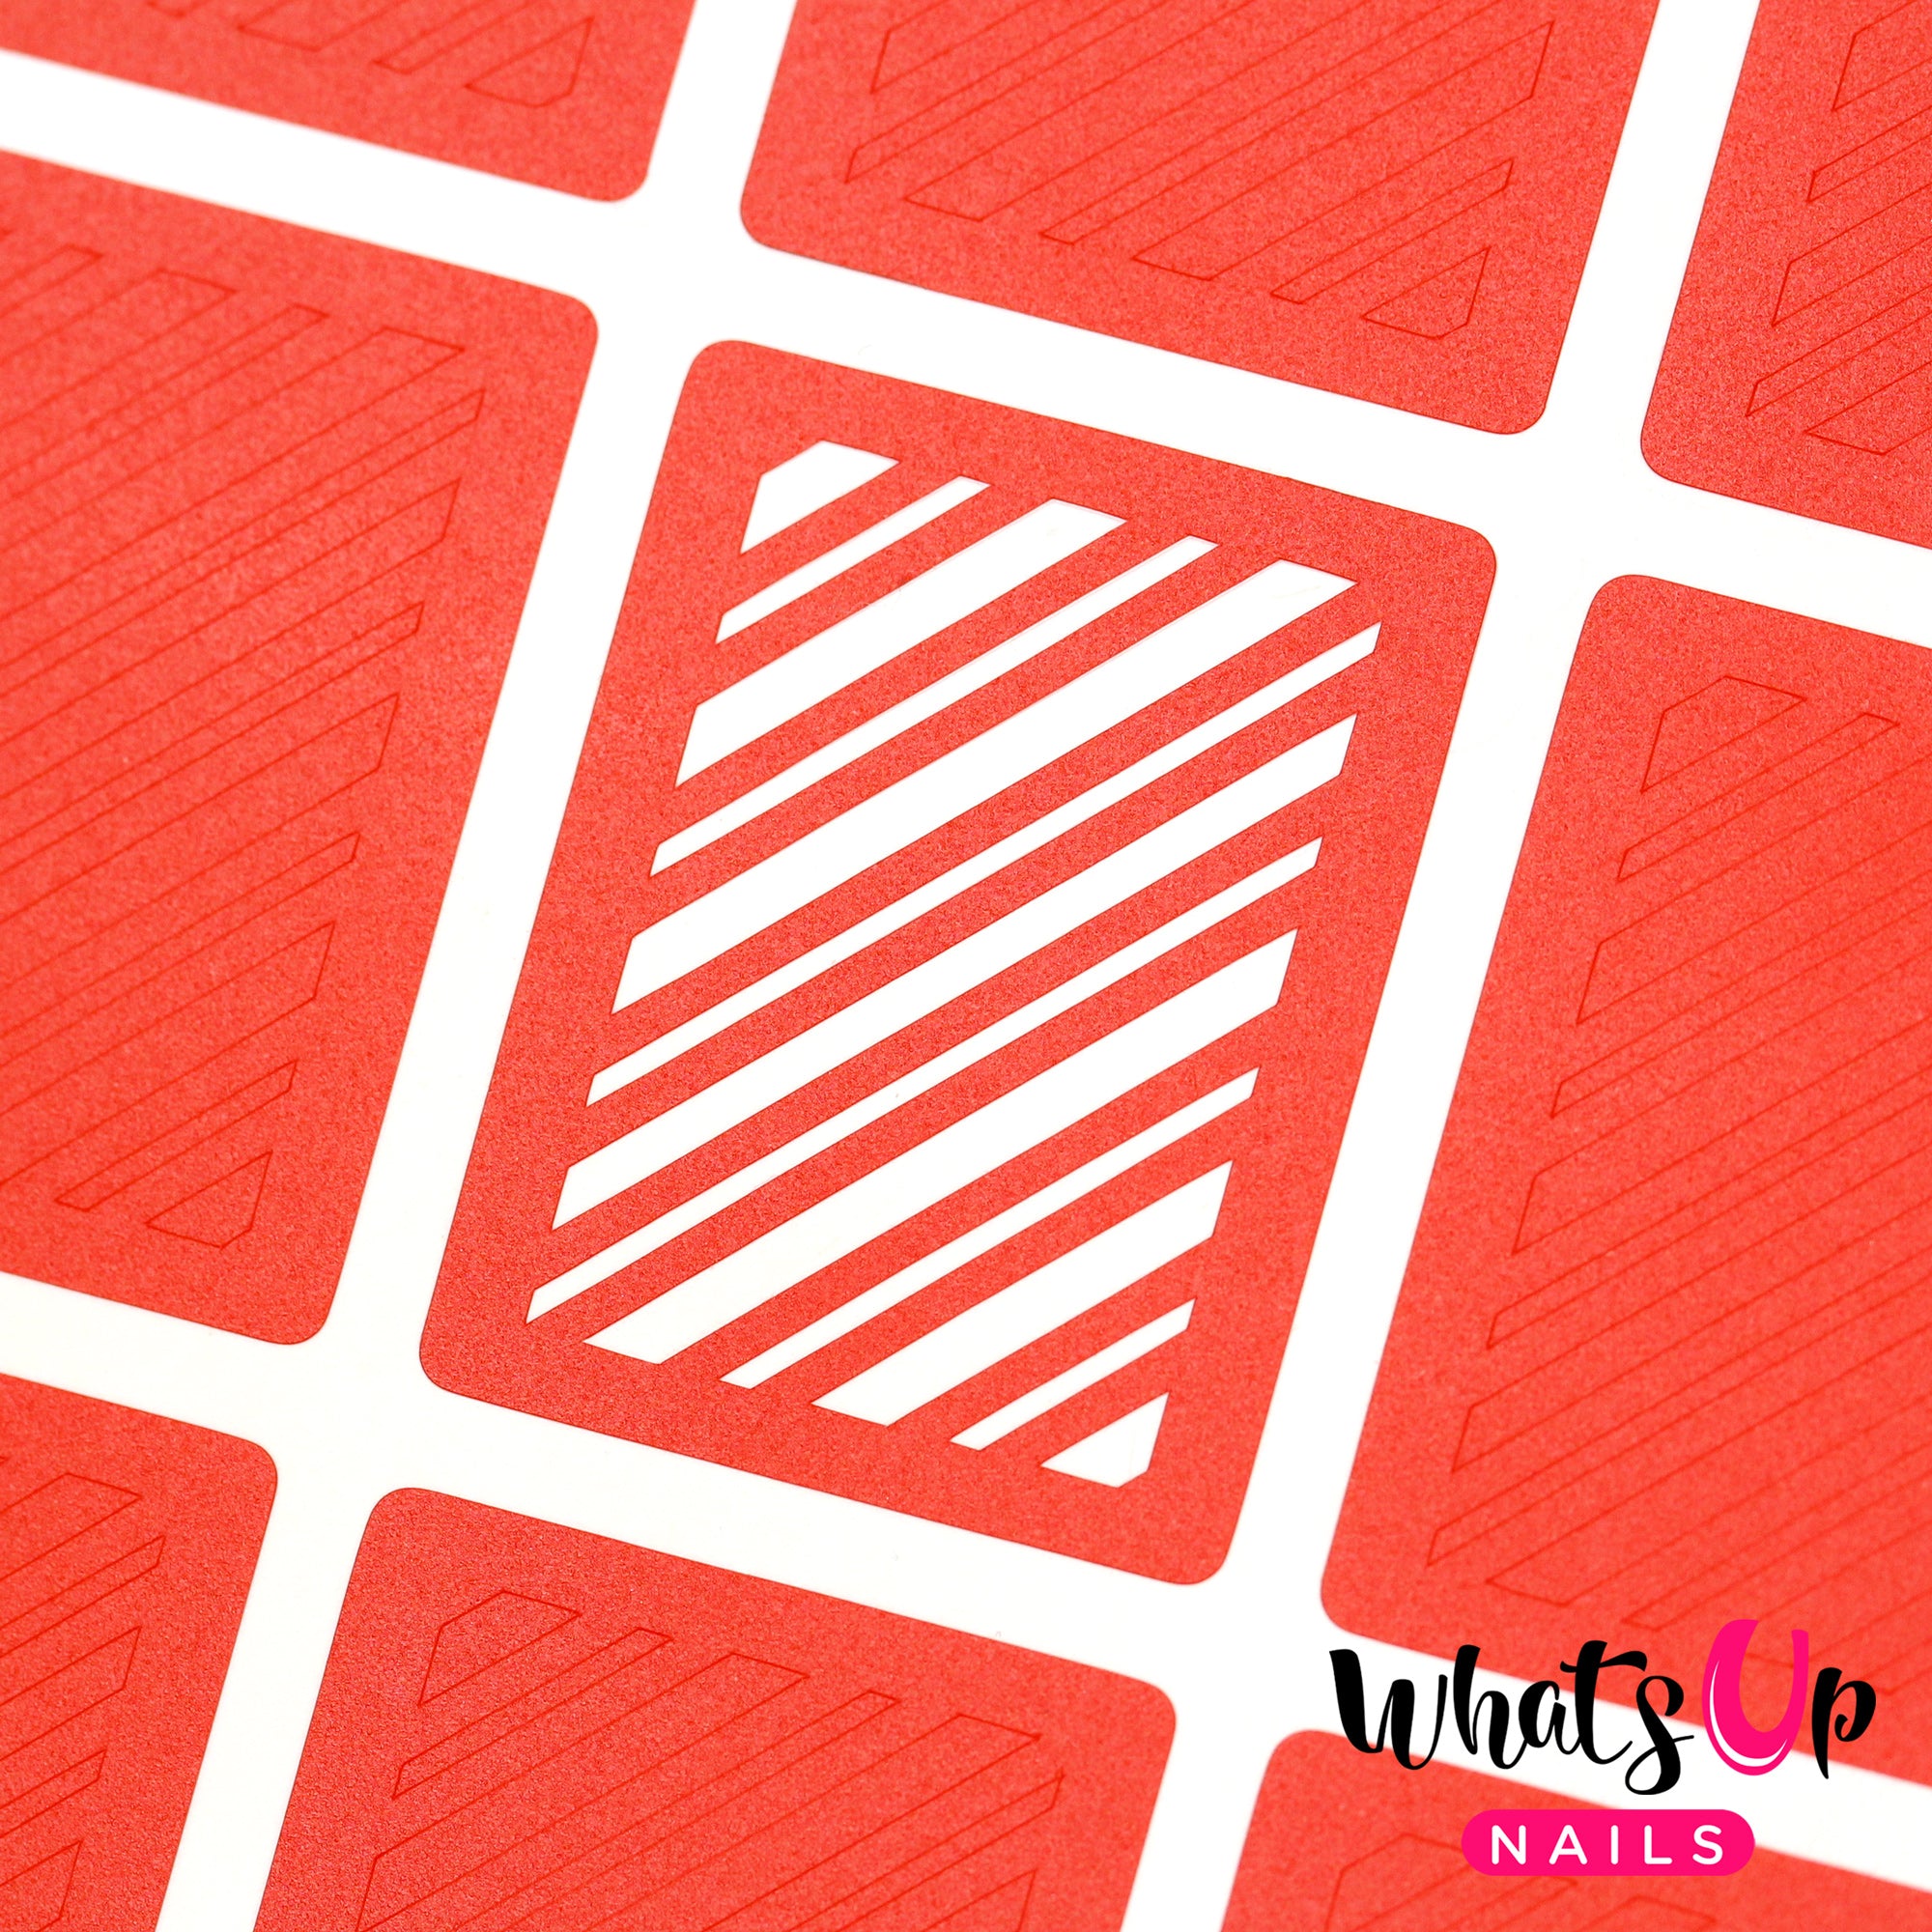 Whats Up Nails - Wrapping Paper Stencils (1 Sheet- 12 Stencils total